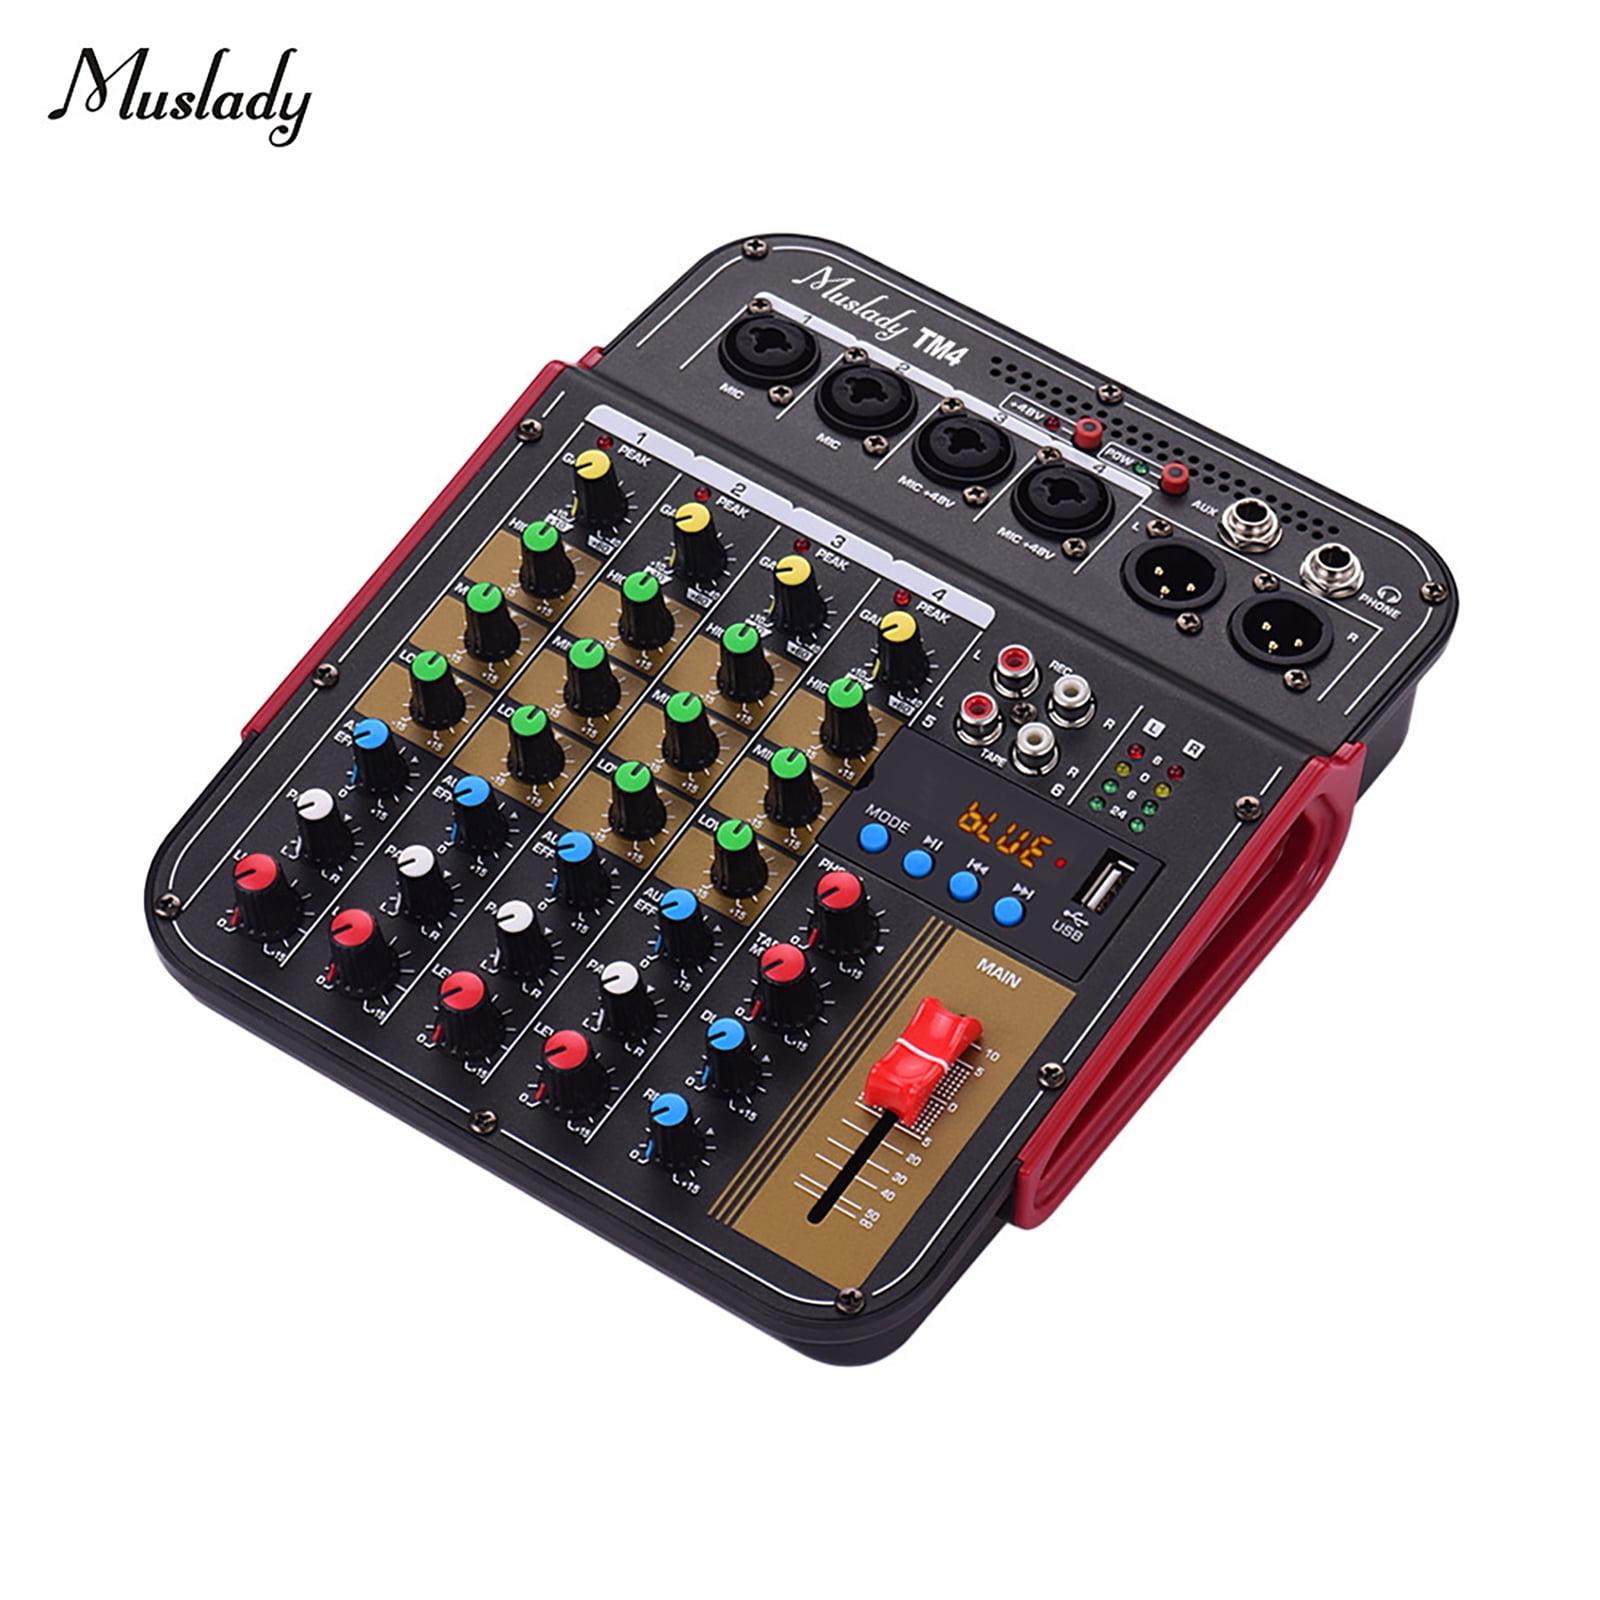 Kalaok Muslady D6 Portable 6-Channel Mixing Console Mixer 7-band EQ Built-in 48V Phantom Power Supports BT Connection USB MP3 Player for Music Recording DJ Network Live Broadcast Karaoke 